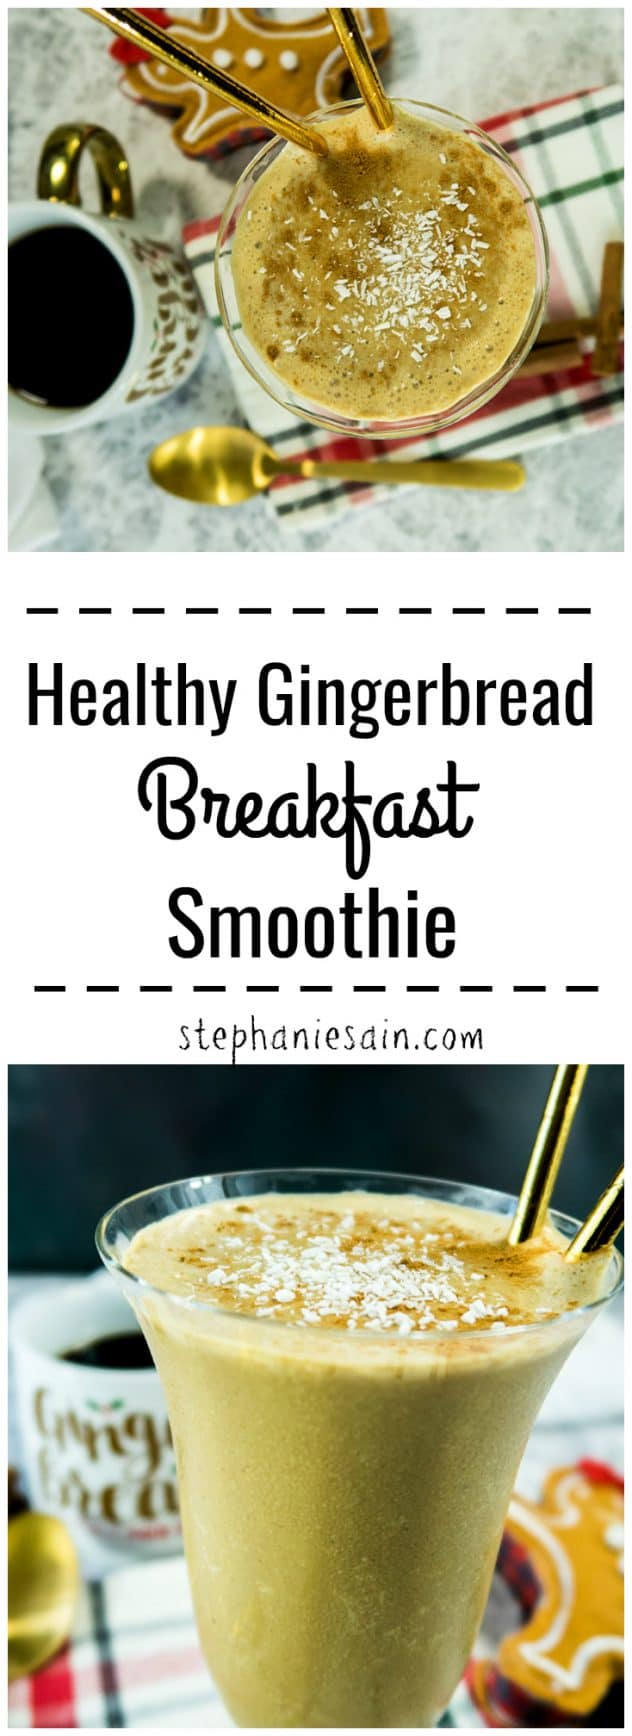 This Healthy Gingerbread Breakfast Smoothie is super Easy to prepare and has all the warm yummy spices of the Holidays & Winter. Perfect healthy, tasty way to start off your day. No Added refined sugars & Gluten Free.